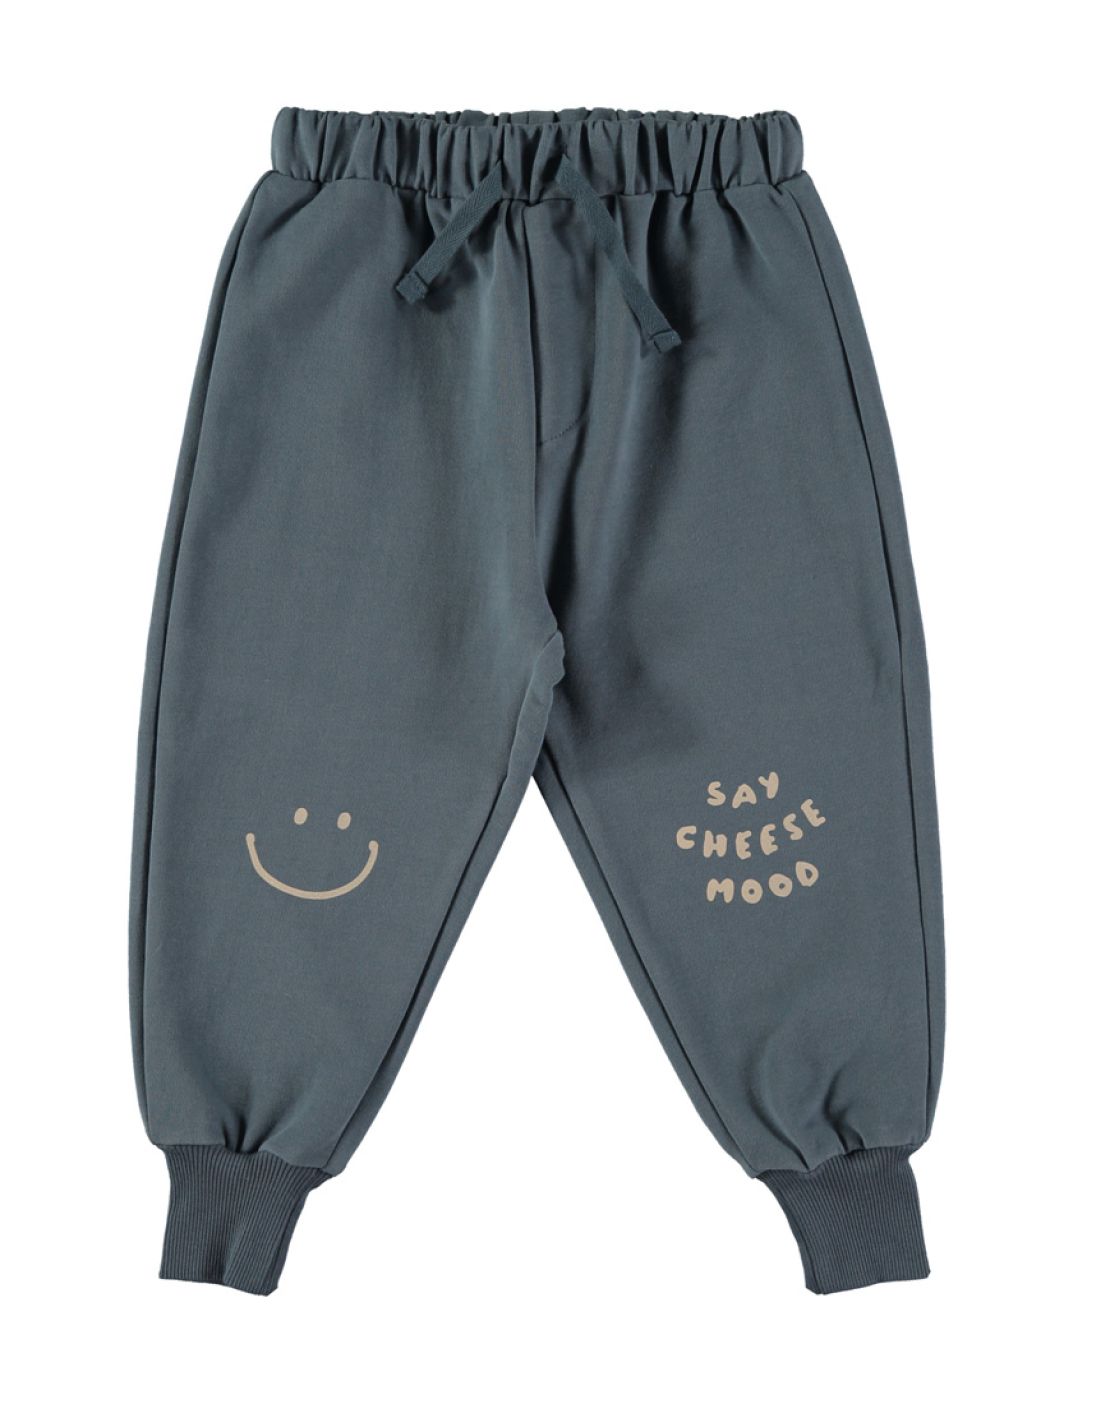 PANTS - SAY CHEESE STORM BLUE